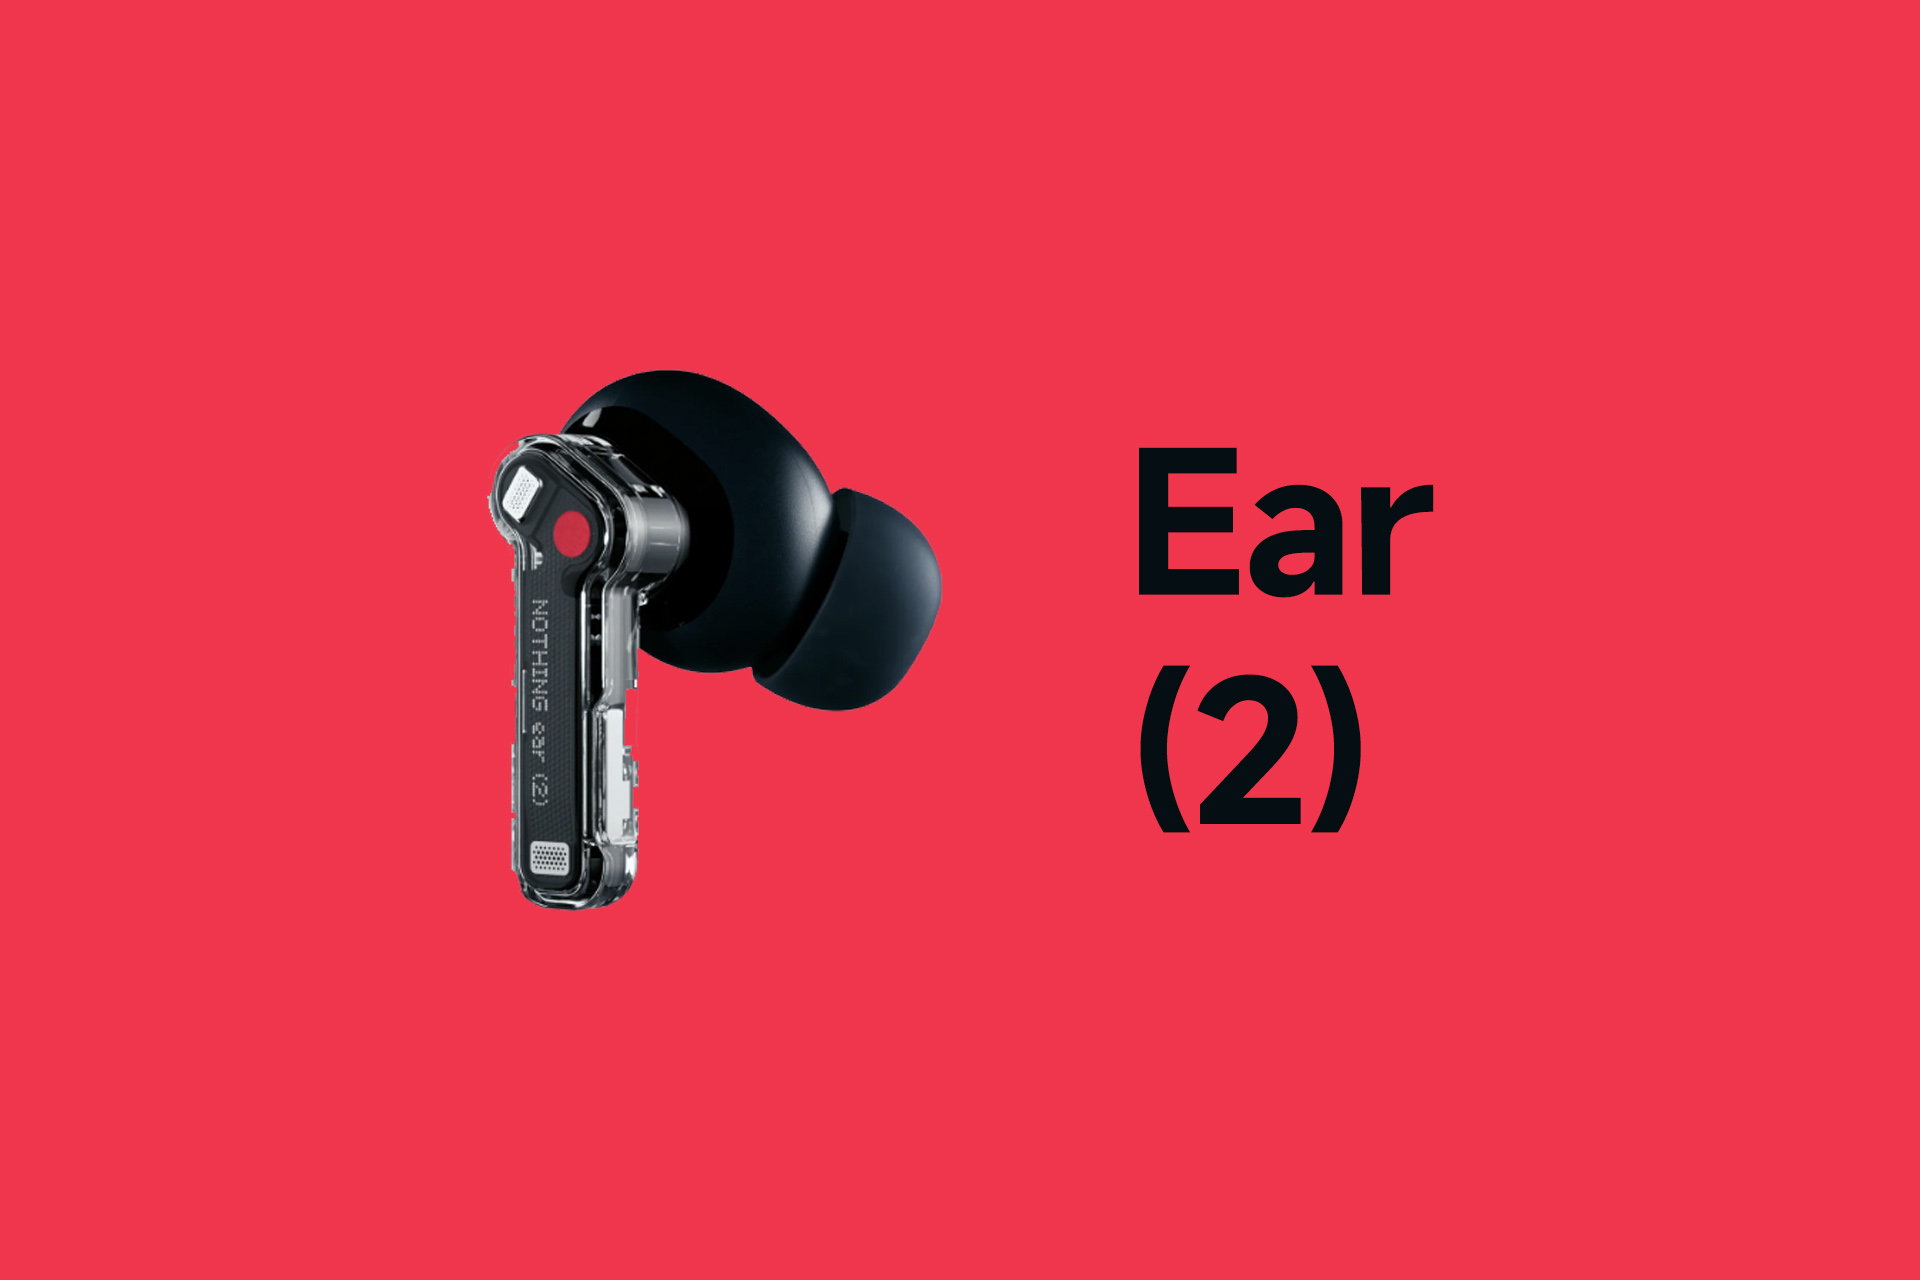 Nothing Ear (2) Black Model Released: A Closer Look